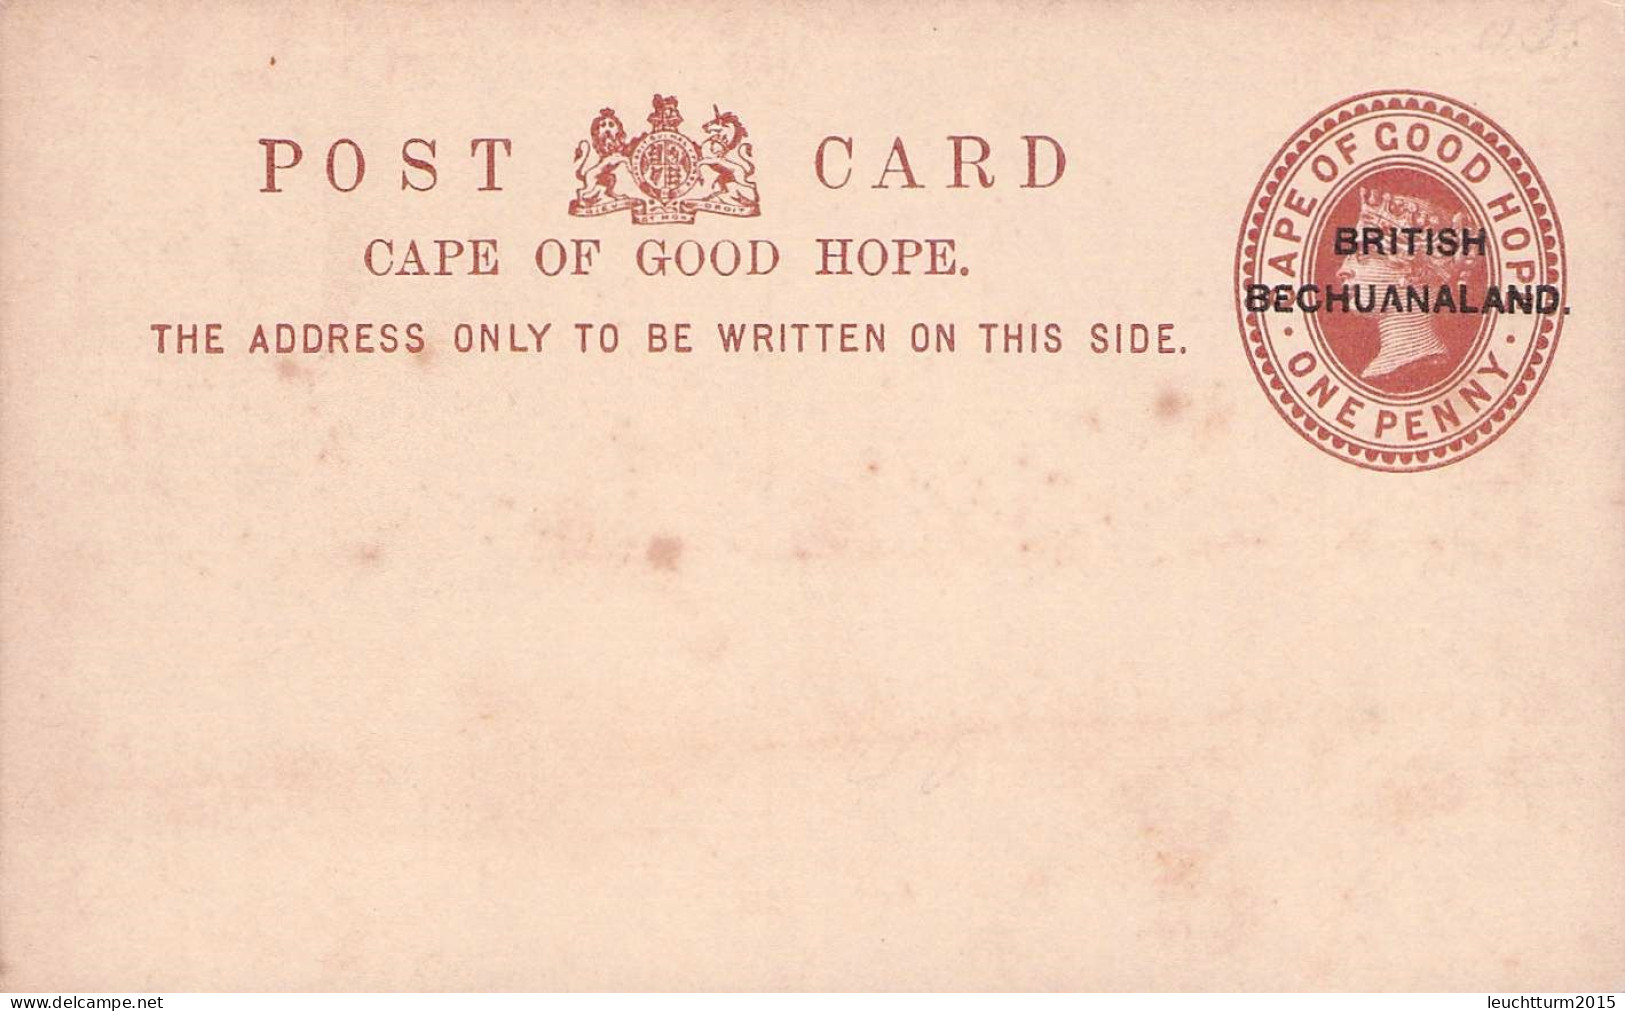 BRITISH BECHUANALAND - POSTCARD ONE PENNY Unc /ZL469 - 1885-1895 Crown Colony